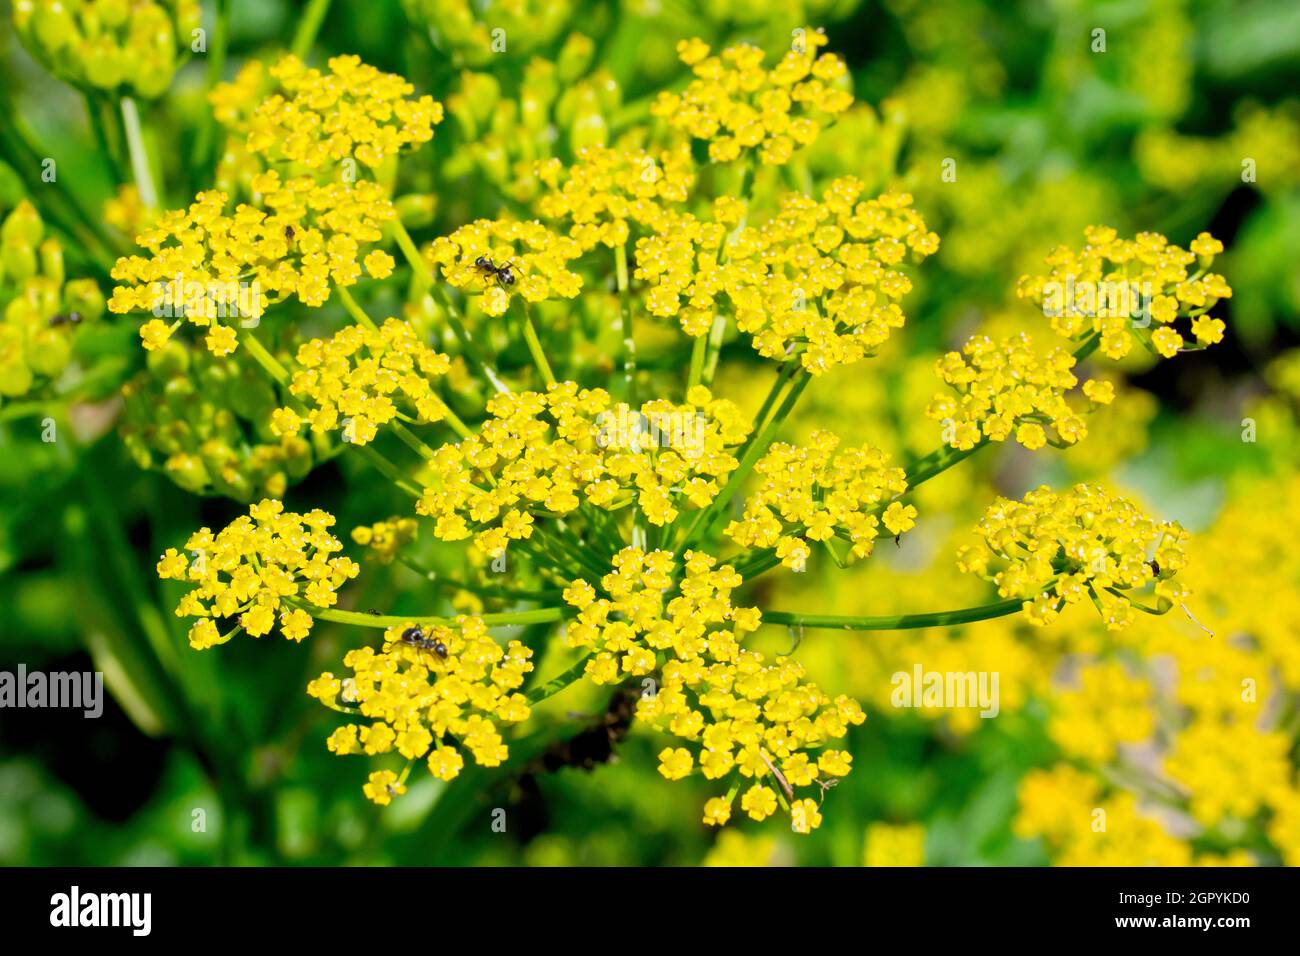 Wild Parsnip (pastinaca sativa), close up showing the many small yellow florets that make up the large broad flowerheads of the plant. Stock Photo